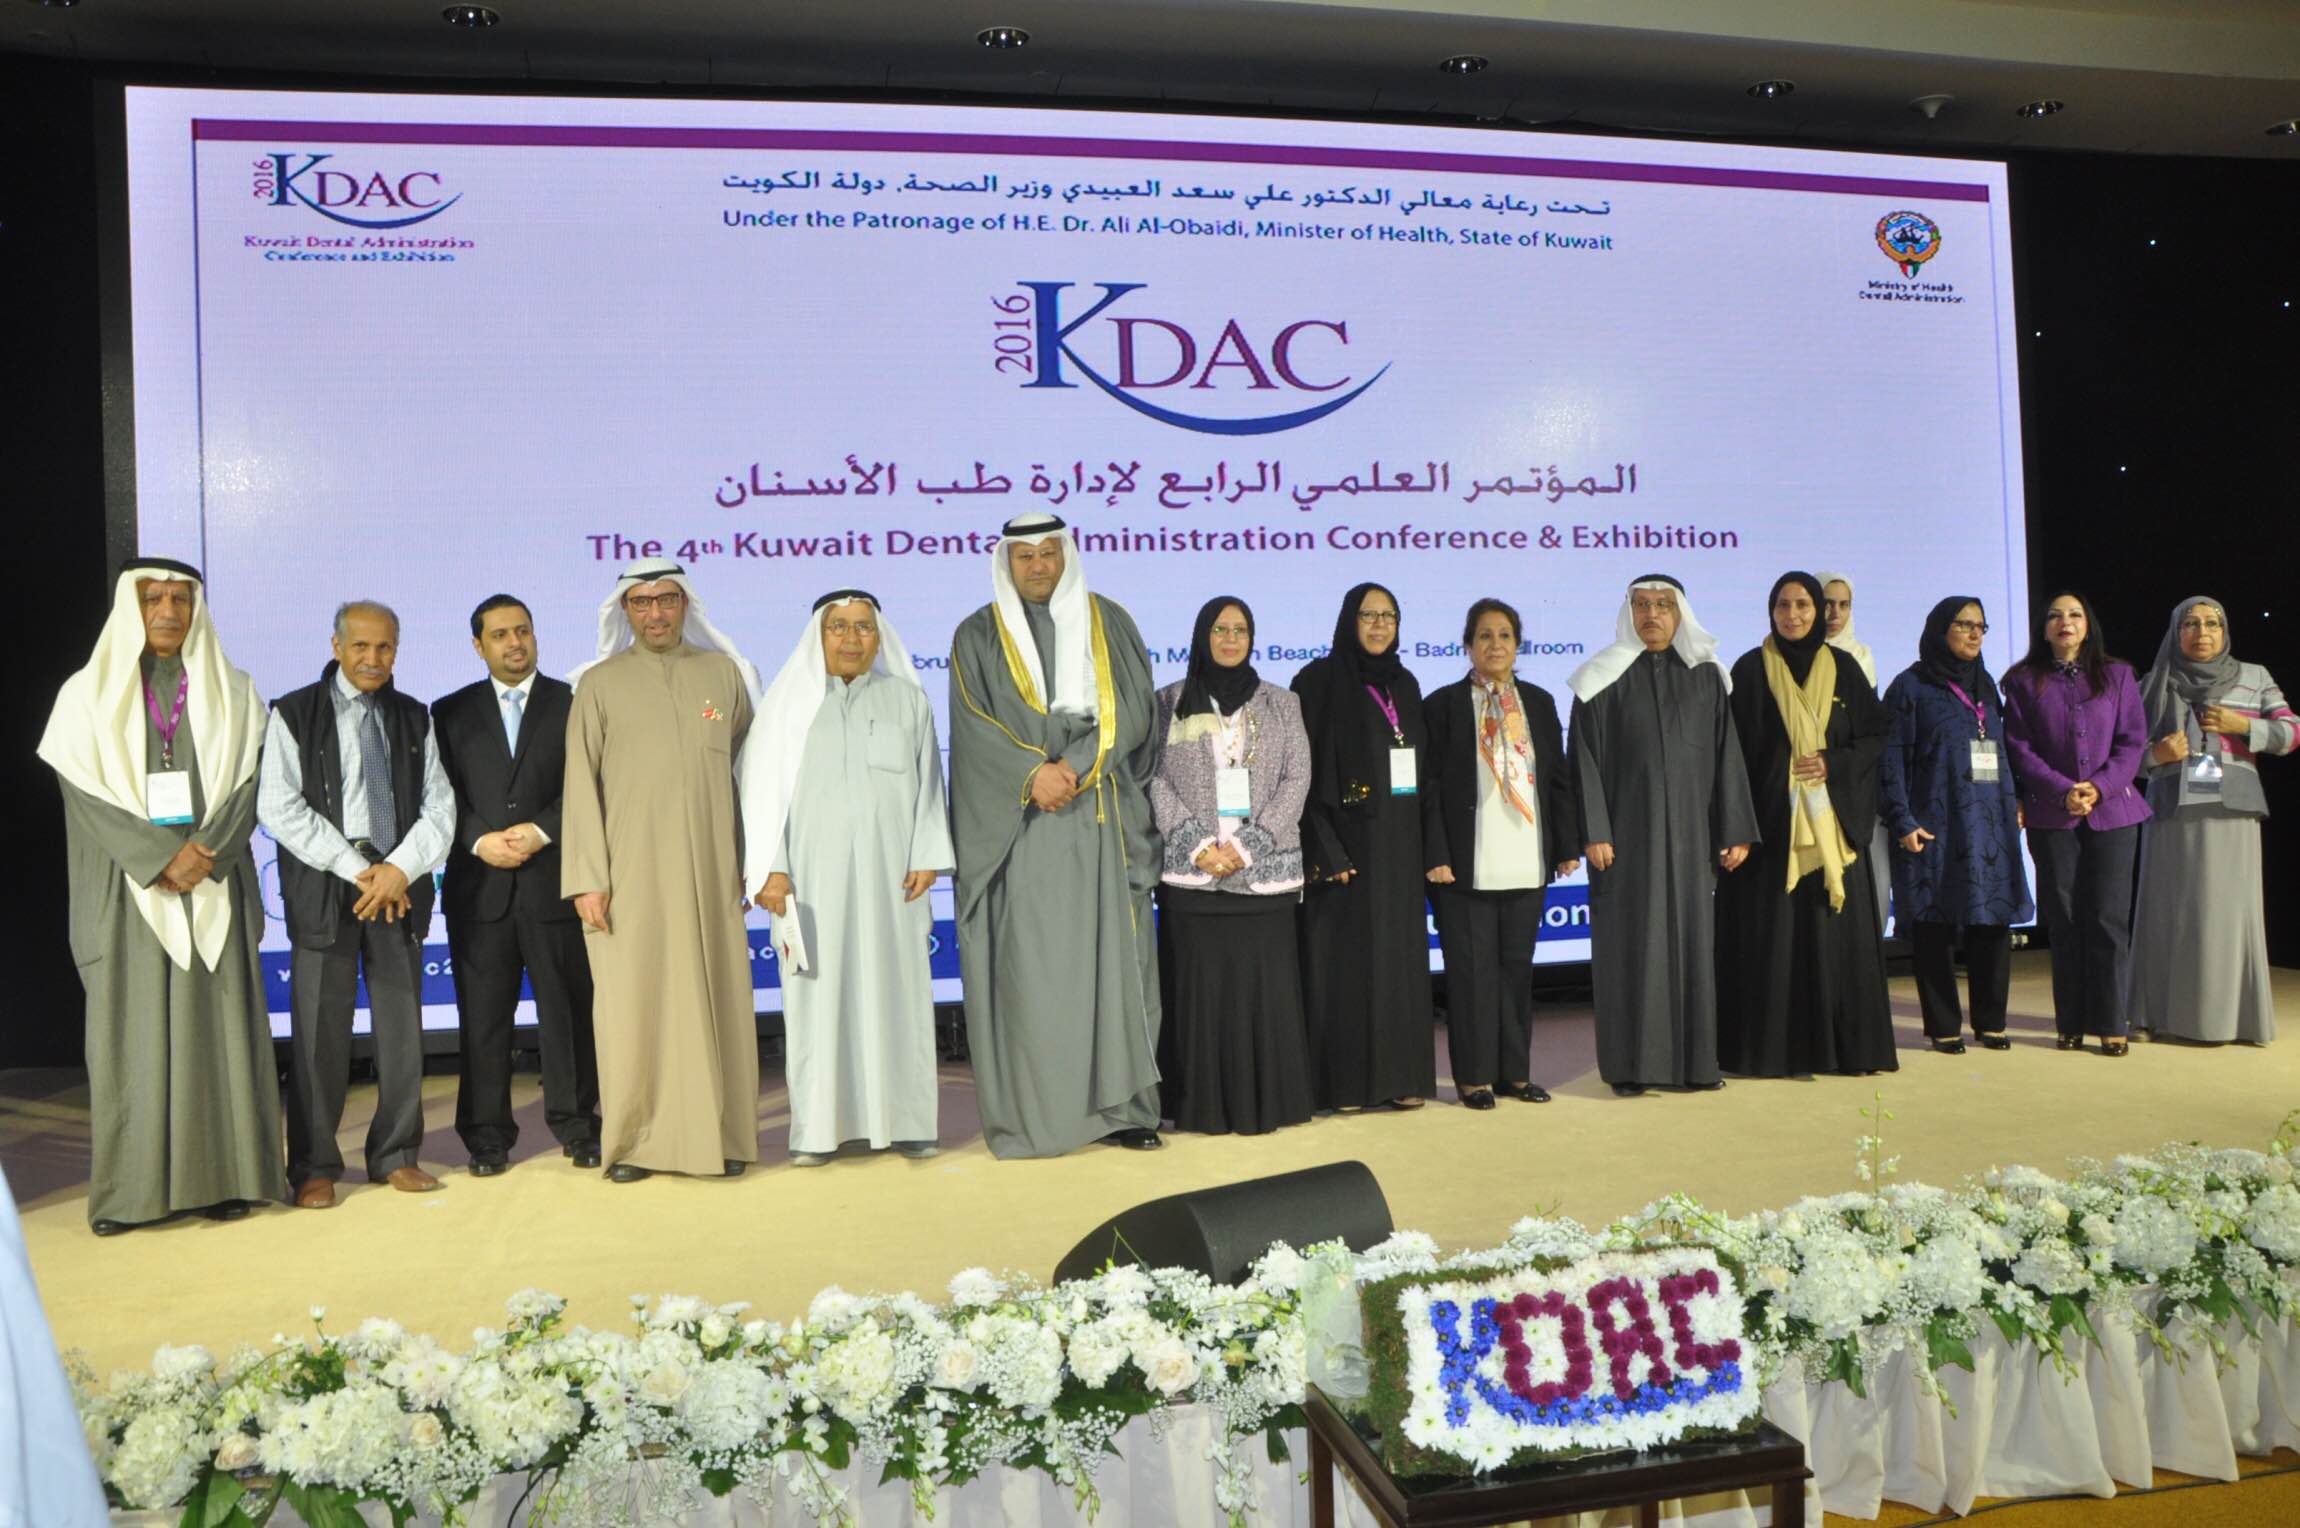 Minister of Health Ali Al-Obaidi attends the Fourth Kuwait Dental Administration Conference